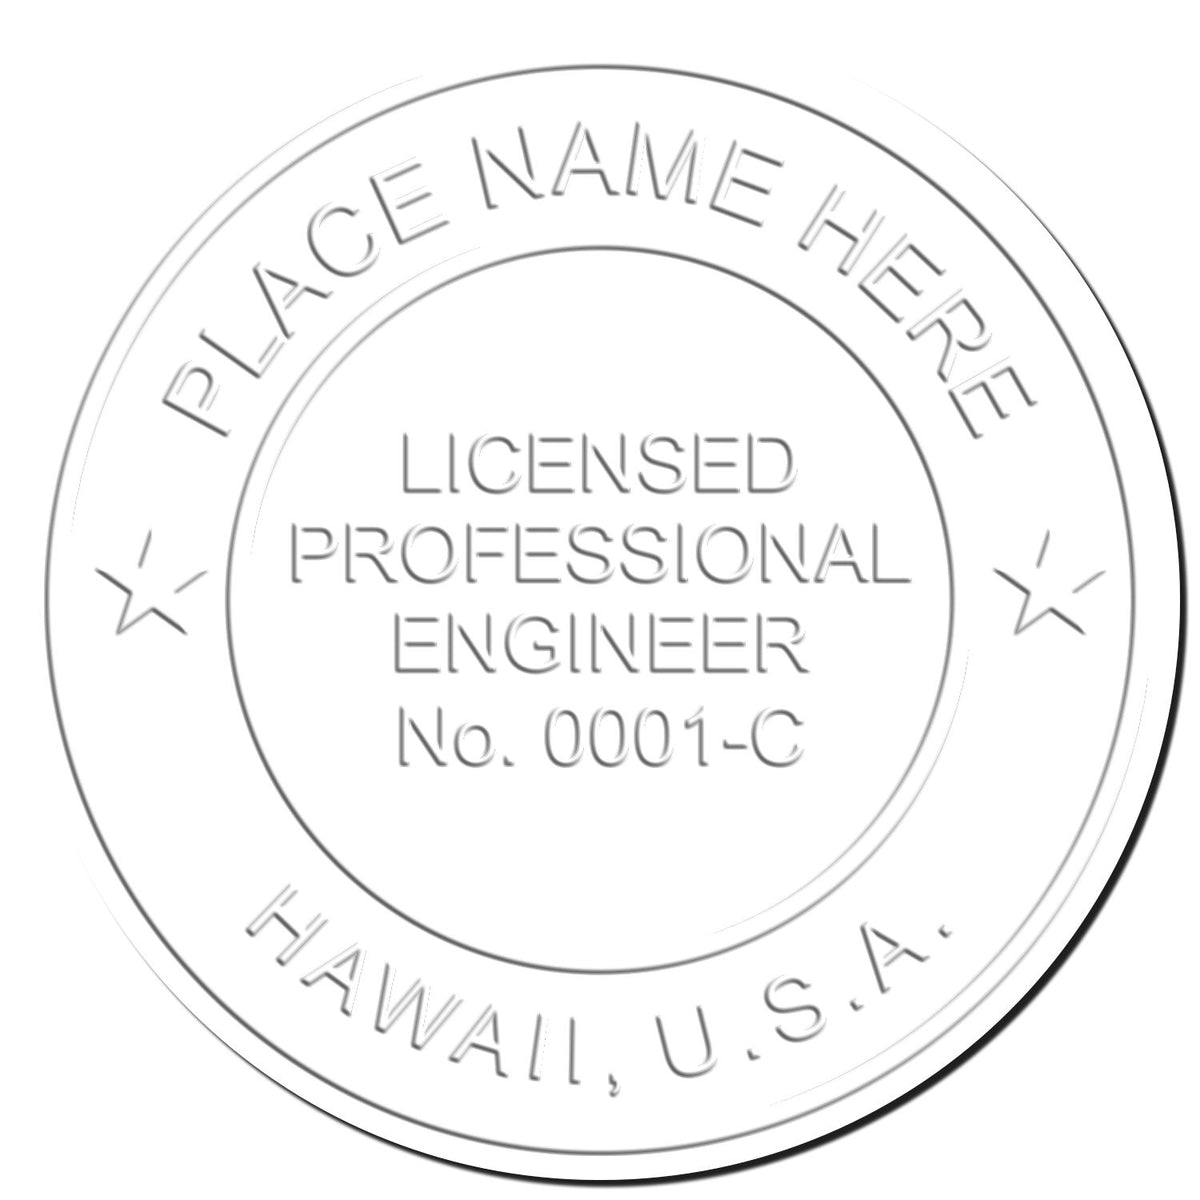 This paper is stamped with a sample imprint of the Heavy Duty Cast Iron Hawaii Engineer Seal Embosser, signifying its quality and reliability.